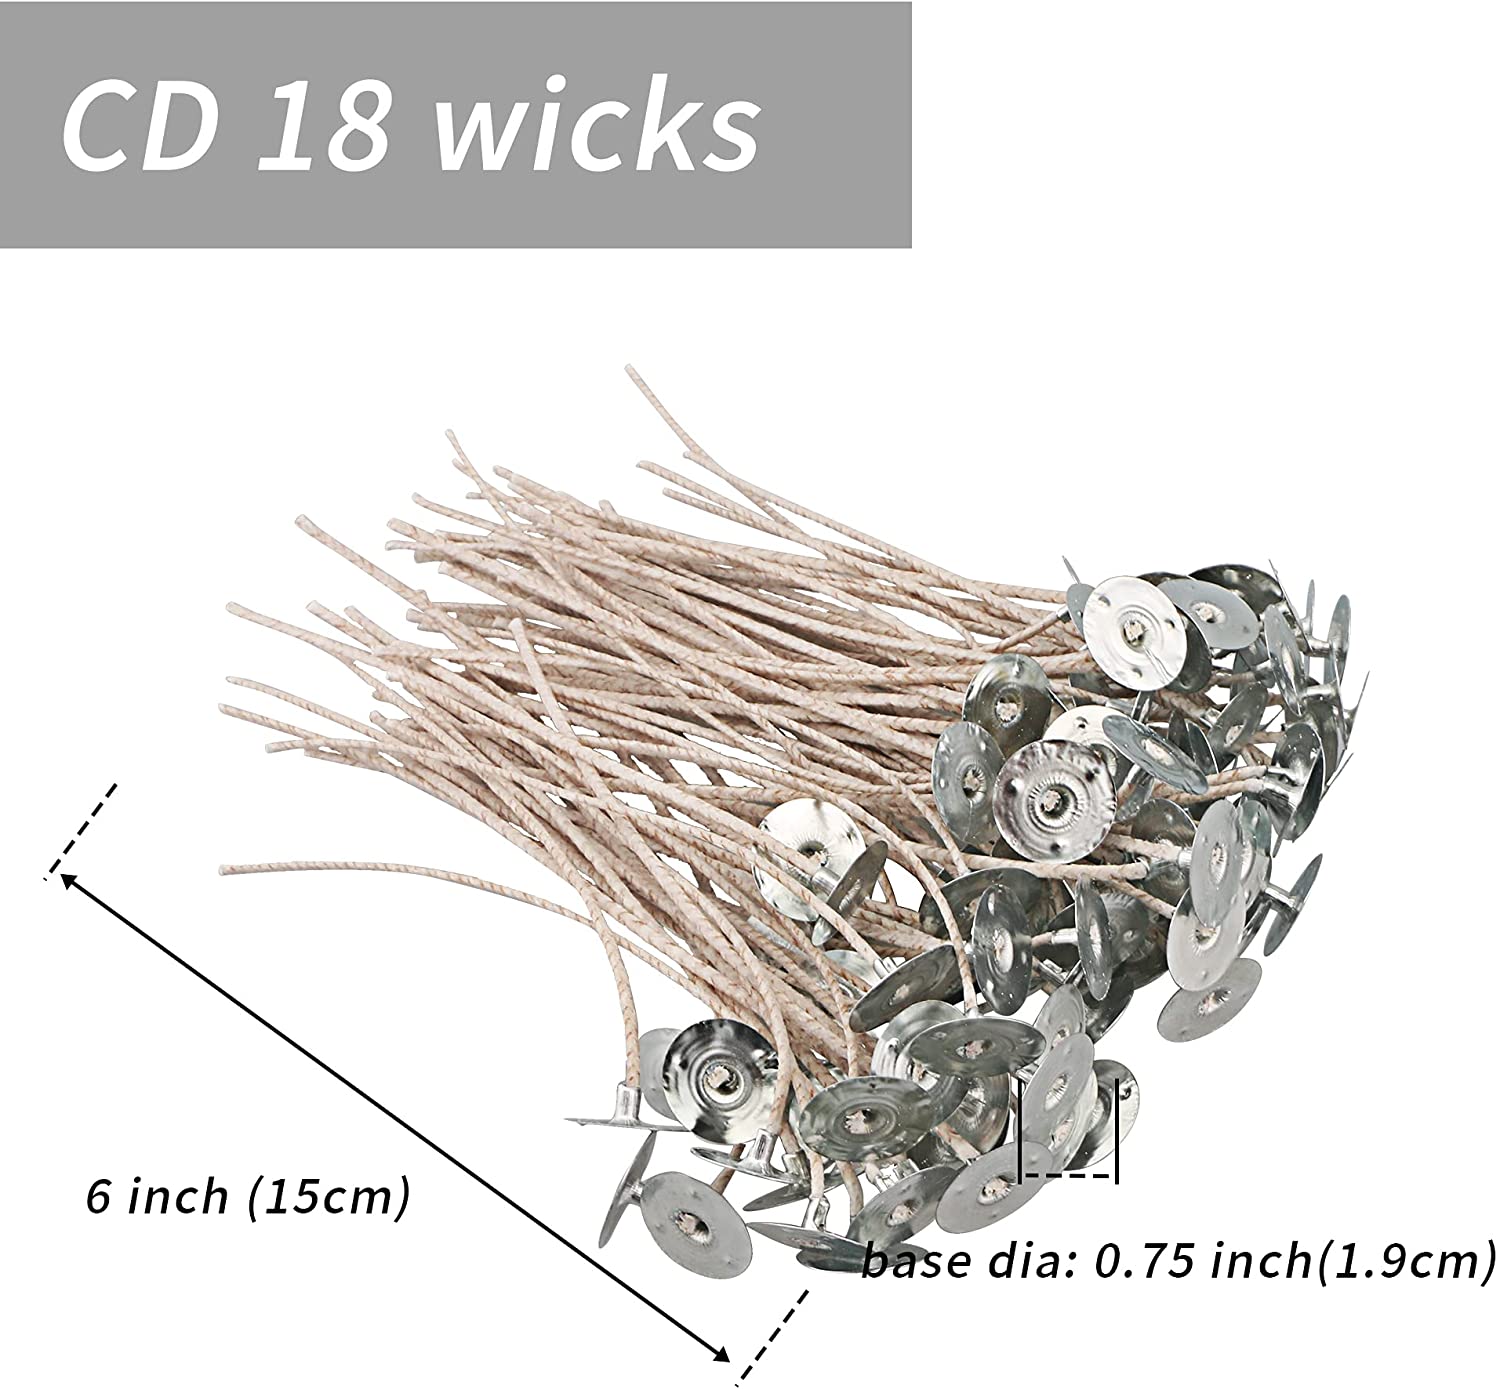 MILIVIXAY CD Series Candle Wicks for Soy Candles,100pcs CD 18 6 Pretabbed  Wicks,Cotton & Paper Wicks for Candle Making.